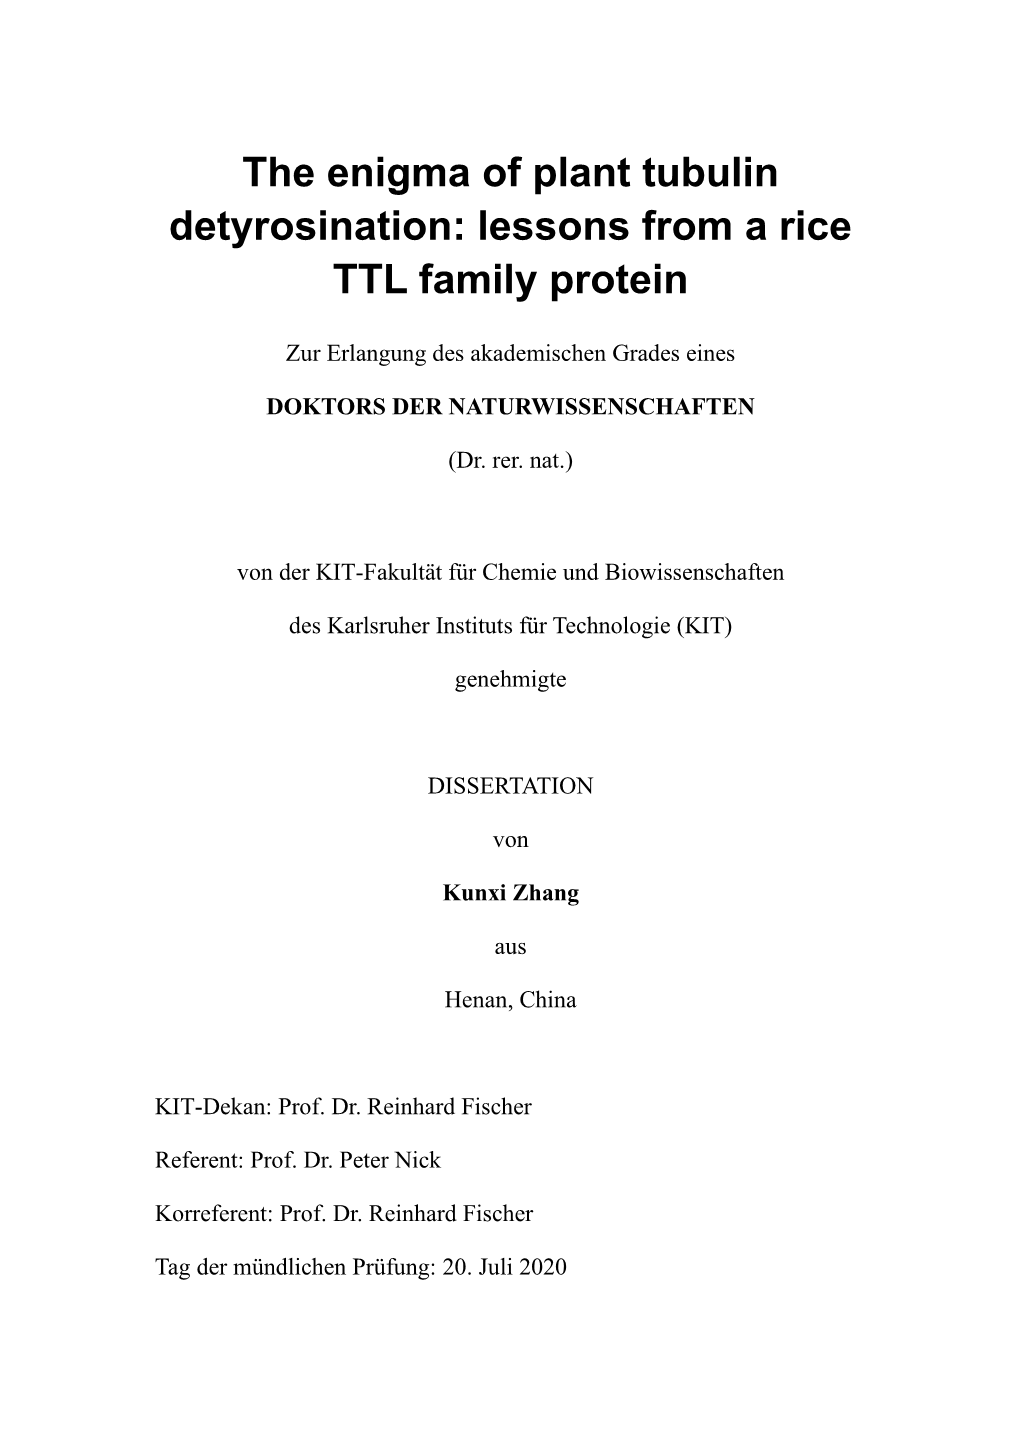 The Enigma of Plant Tubulin Detyrosination: Lessons from a Rice TTL Family Protein